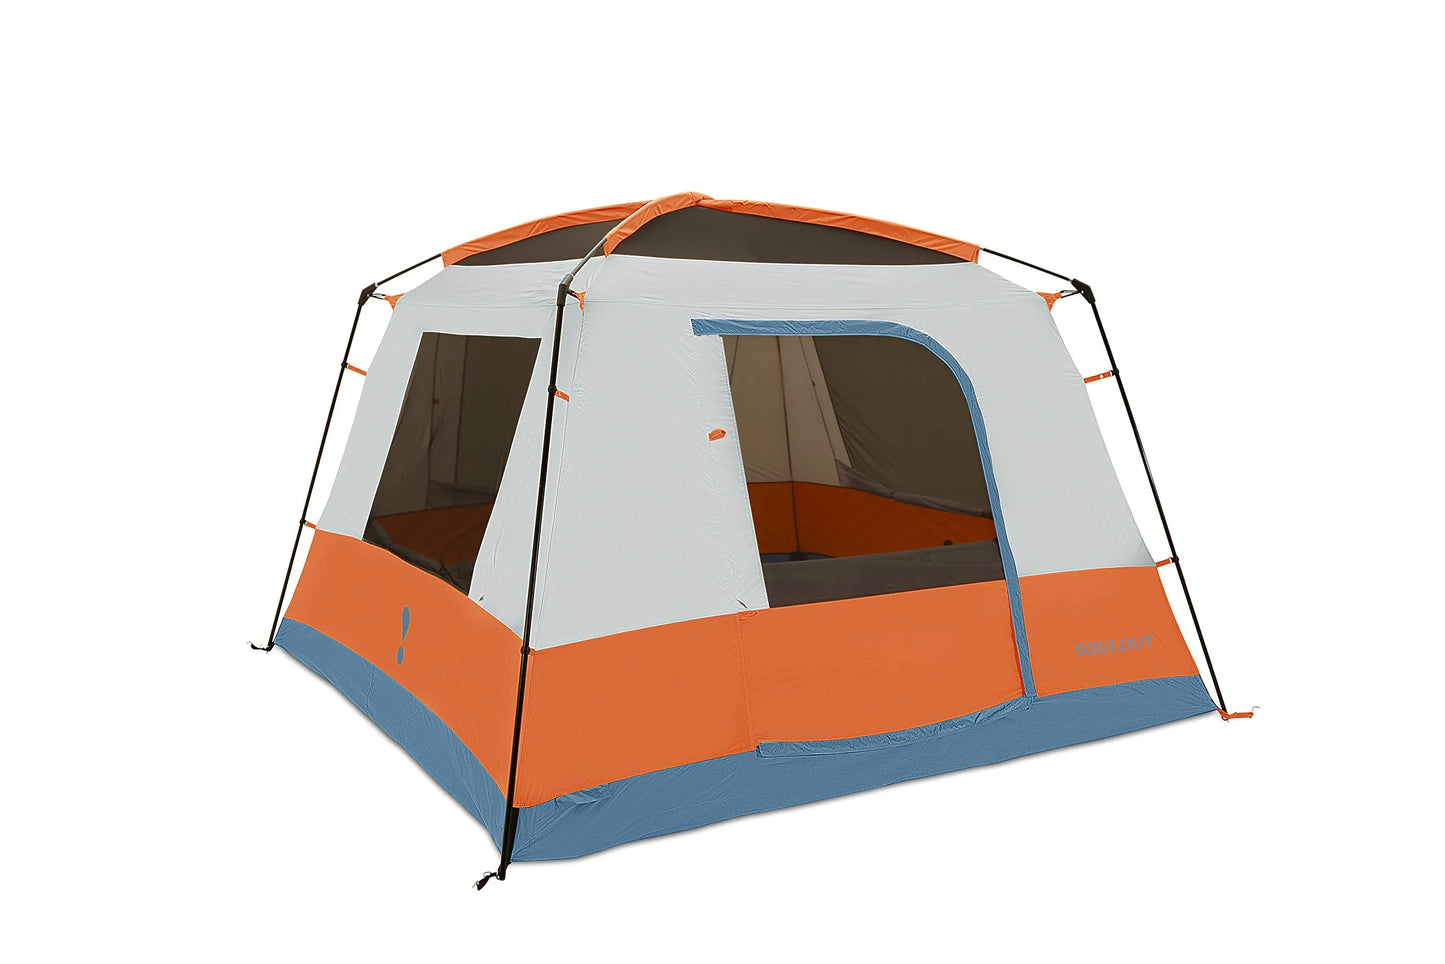 SOULOUT Copper Canyon LX, 3 Season, Family and Car Camping Tent (4, 6, 8 or 12 Person)